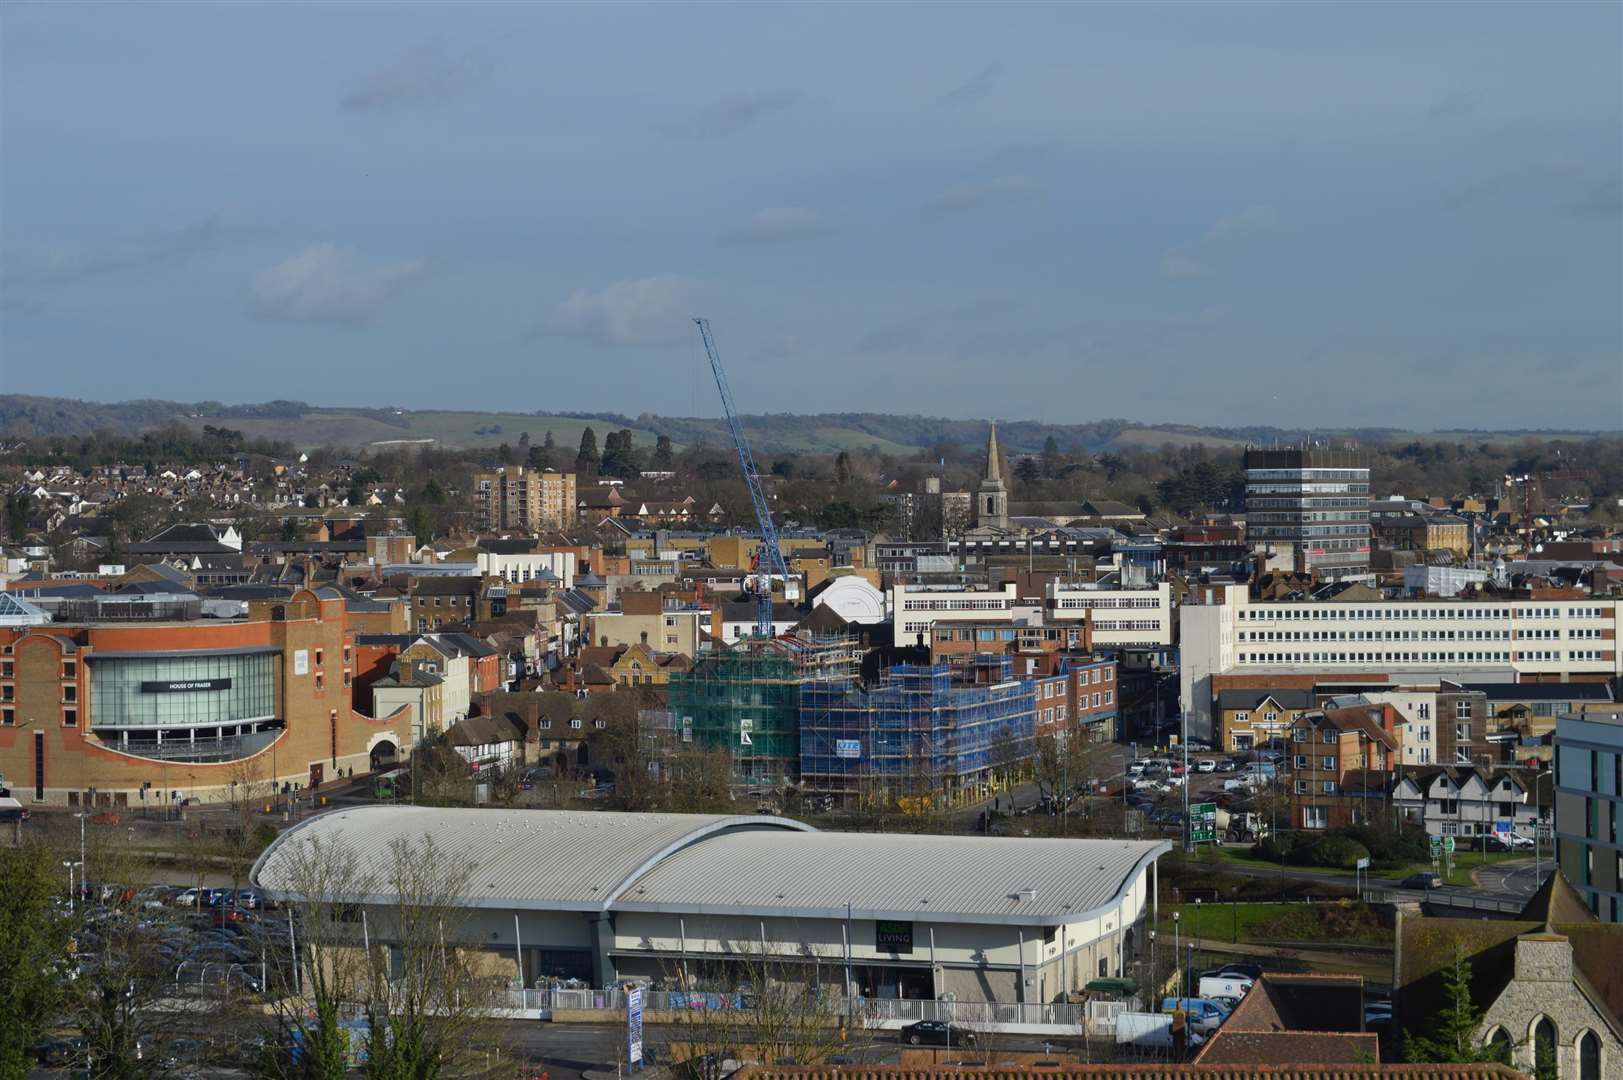 Maidstone has seen a dramatic dip in office space within the confines of the town centre